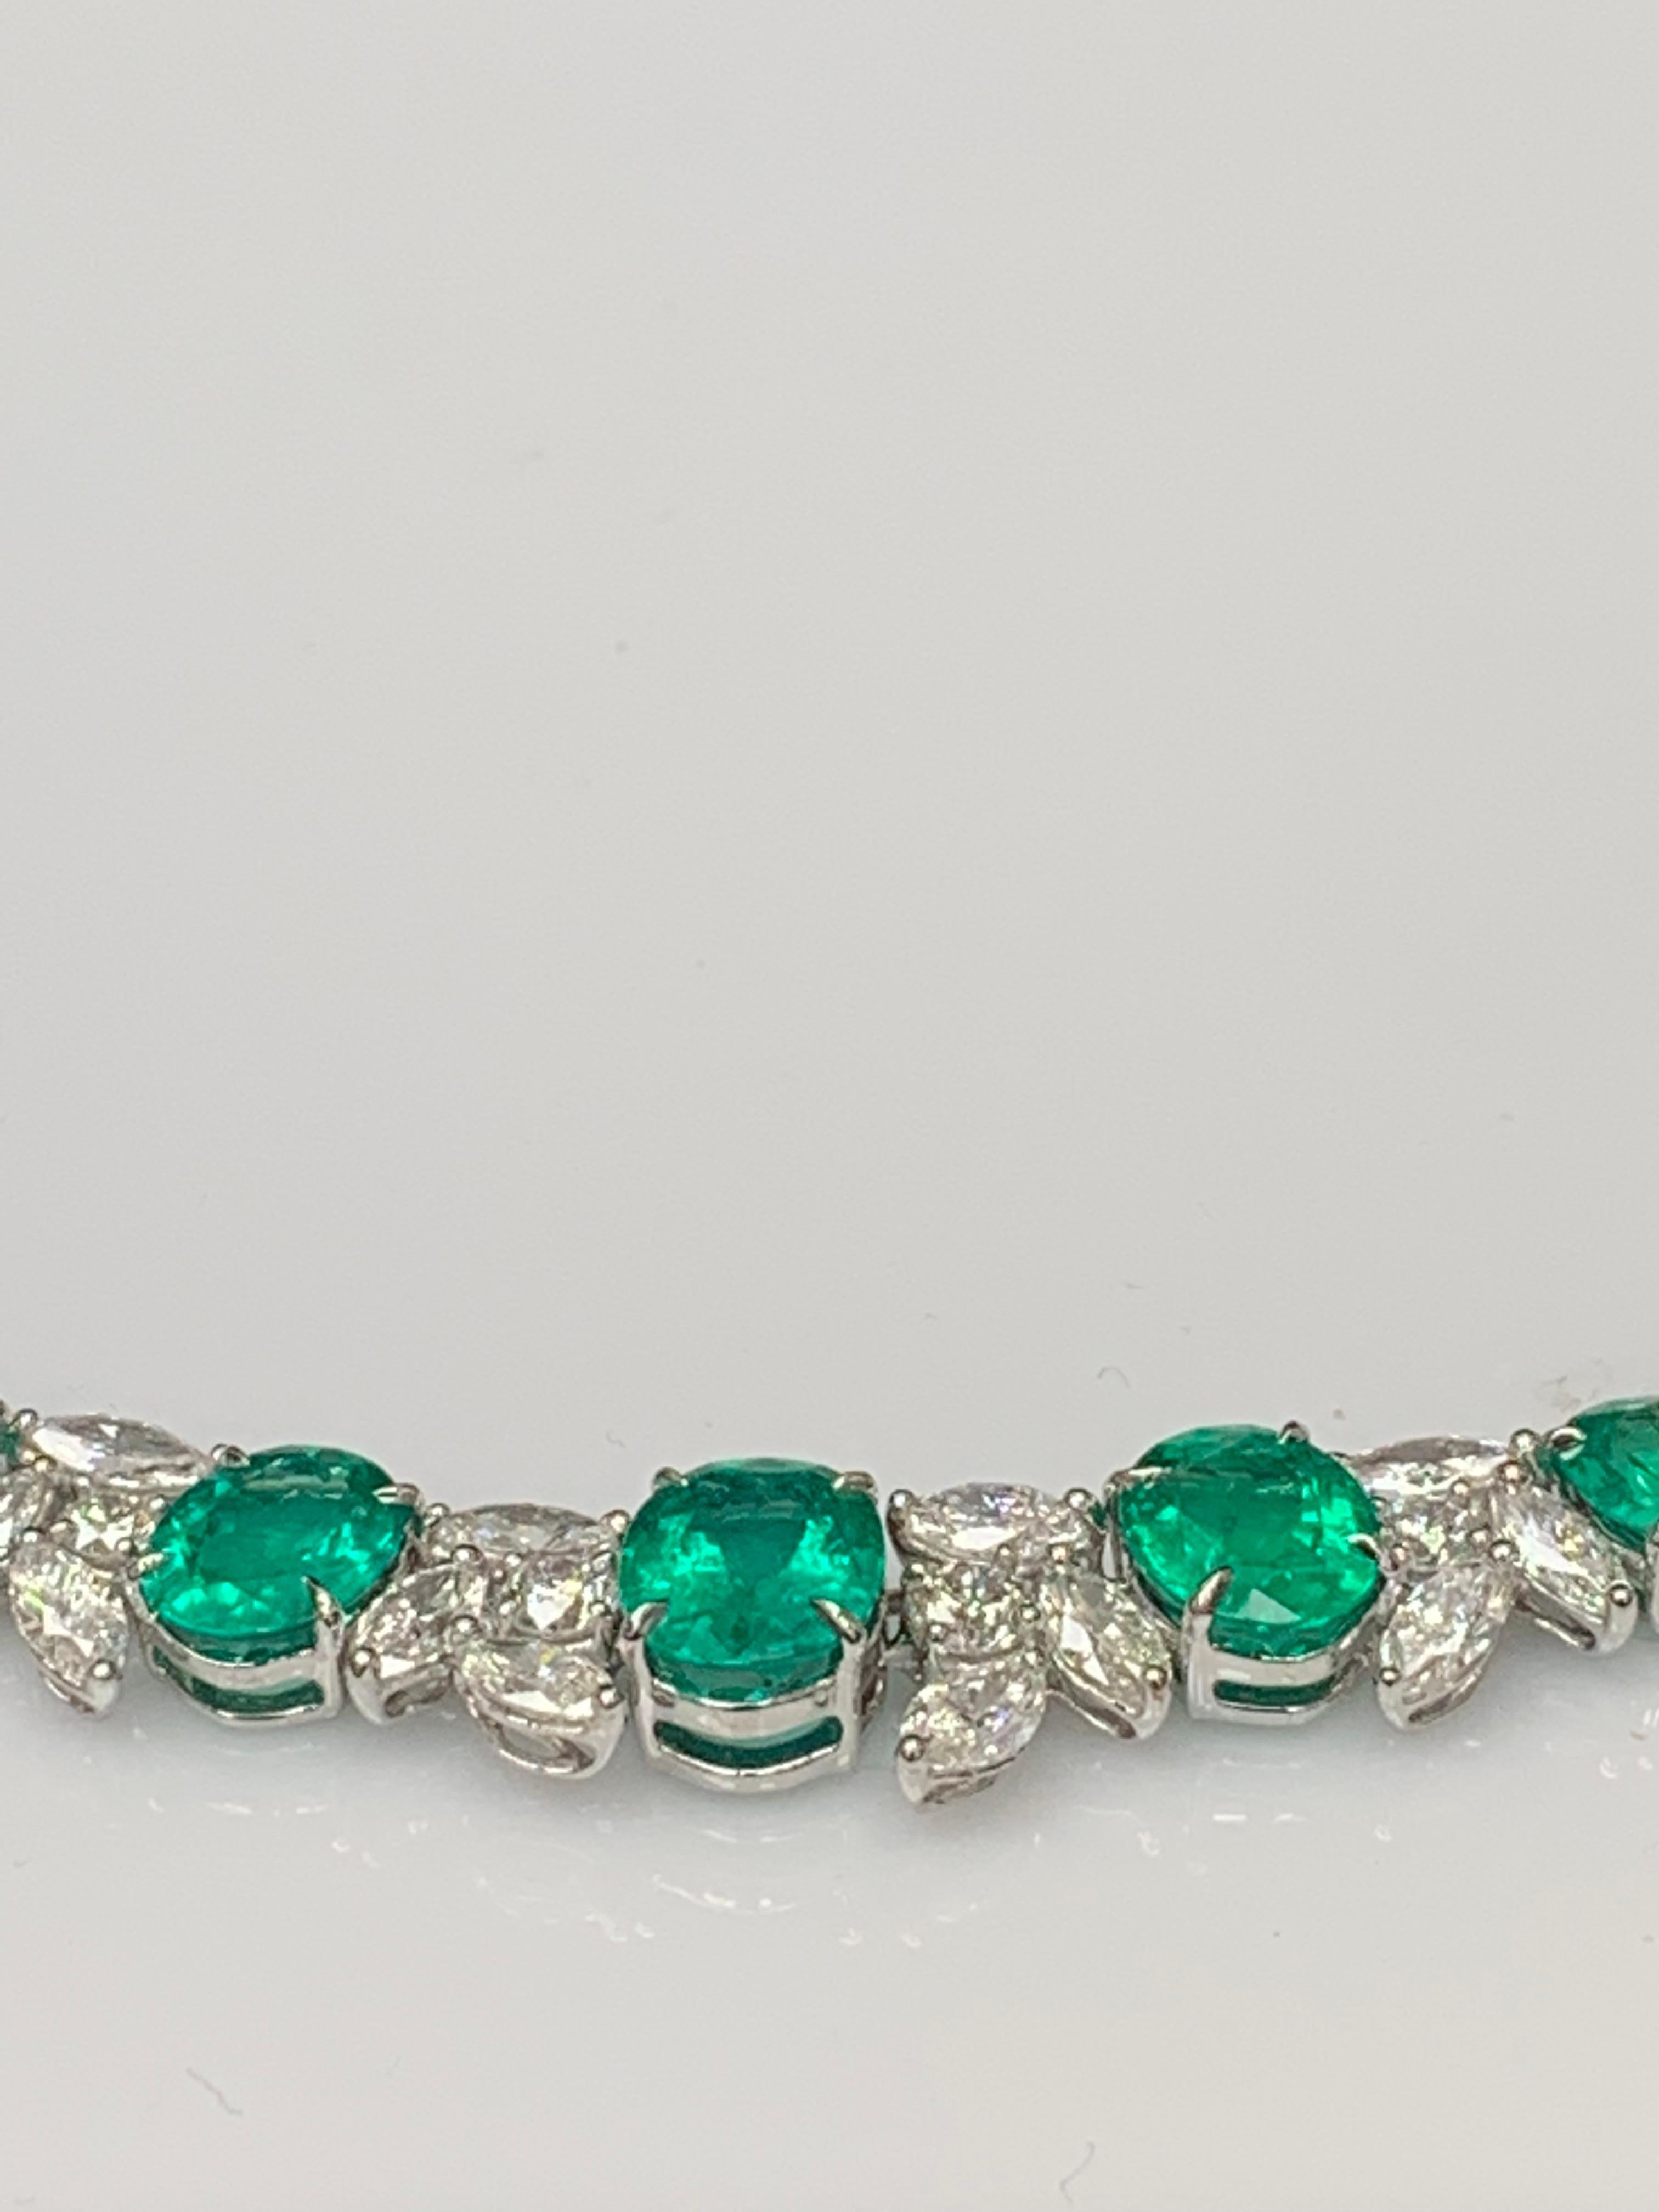 36.87 Carat Emerald and White mixed cut Diamond Necklace in 18k White Gold For Sale 7